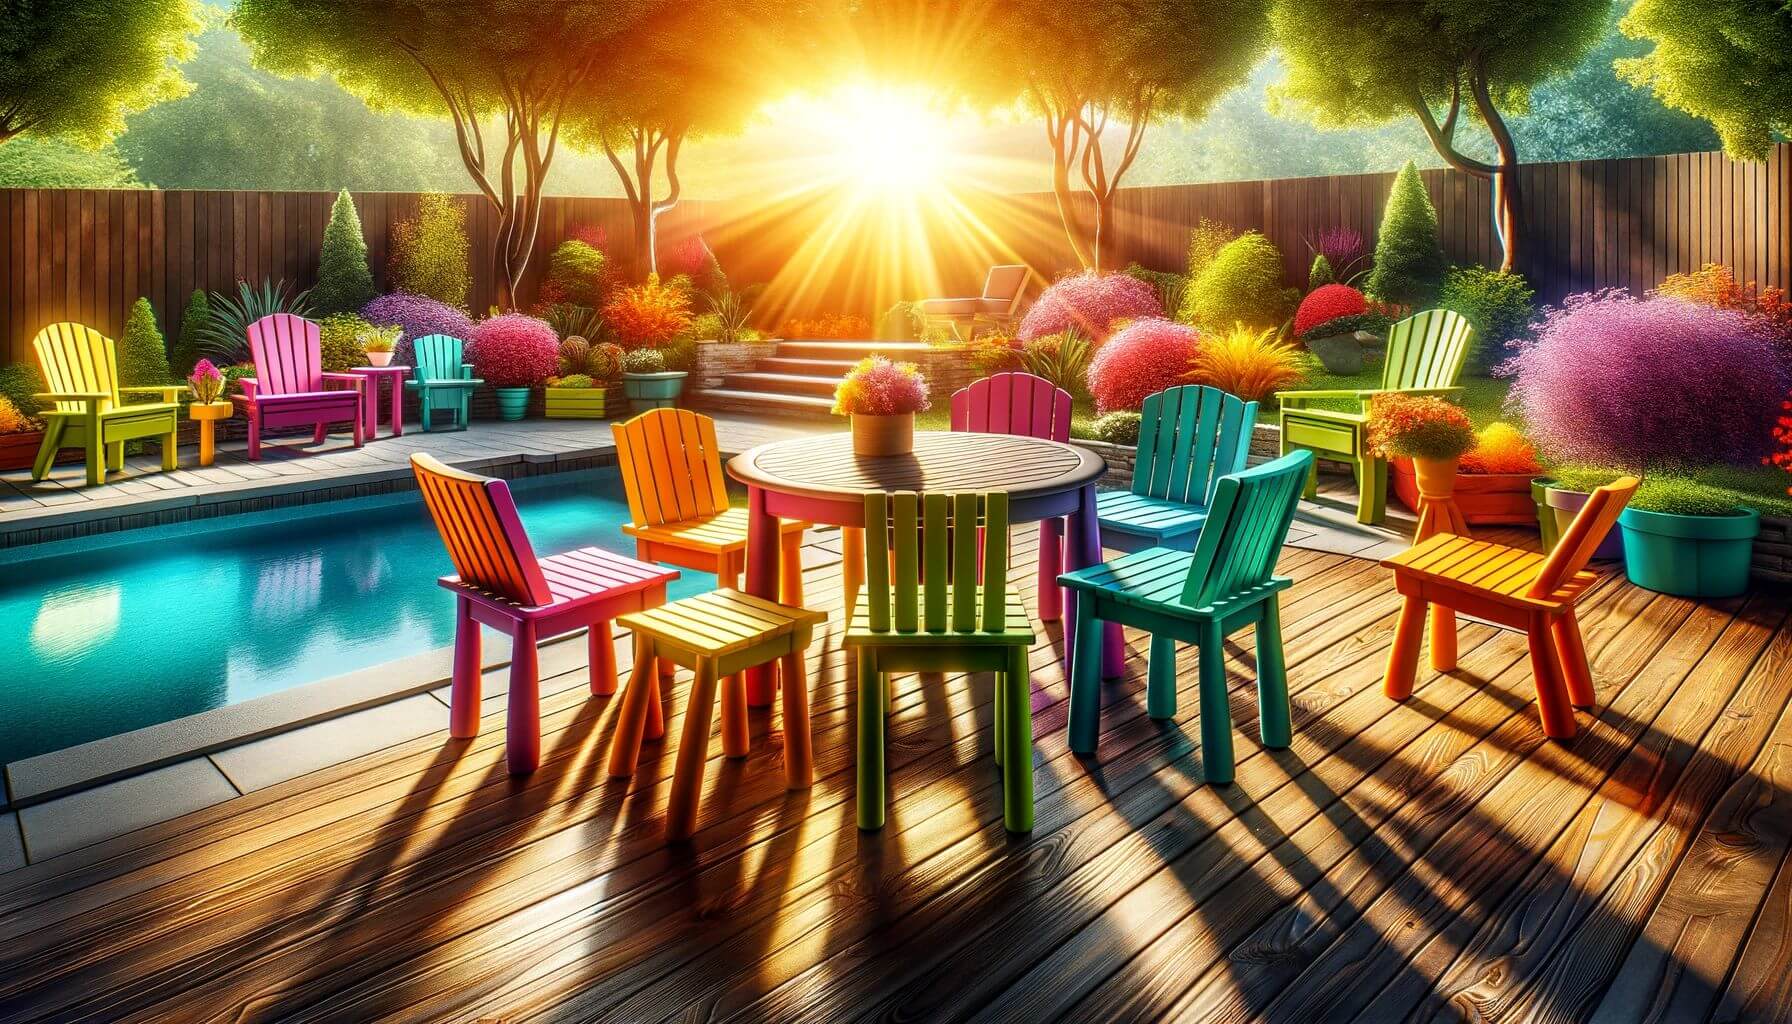 A sunny patio with durable Polywood furniture designed to resist UV rays and sunlight exposure